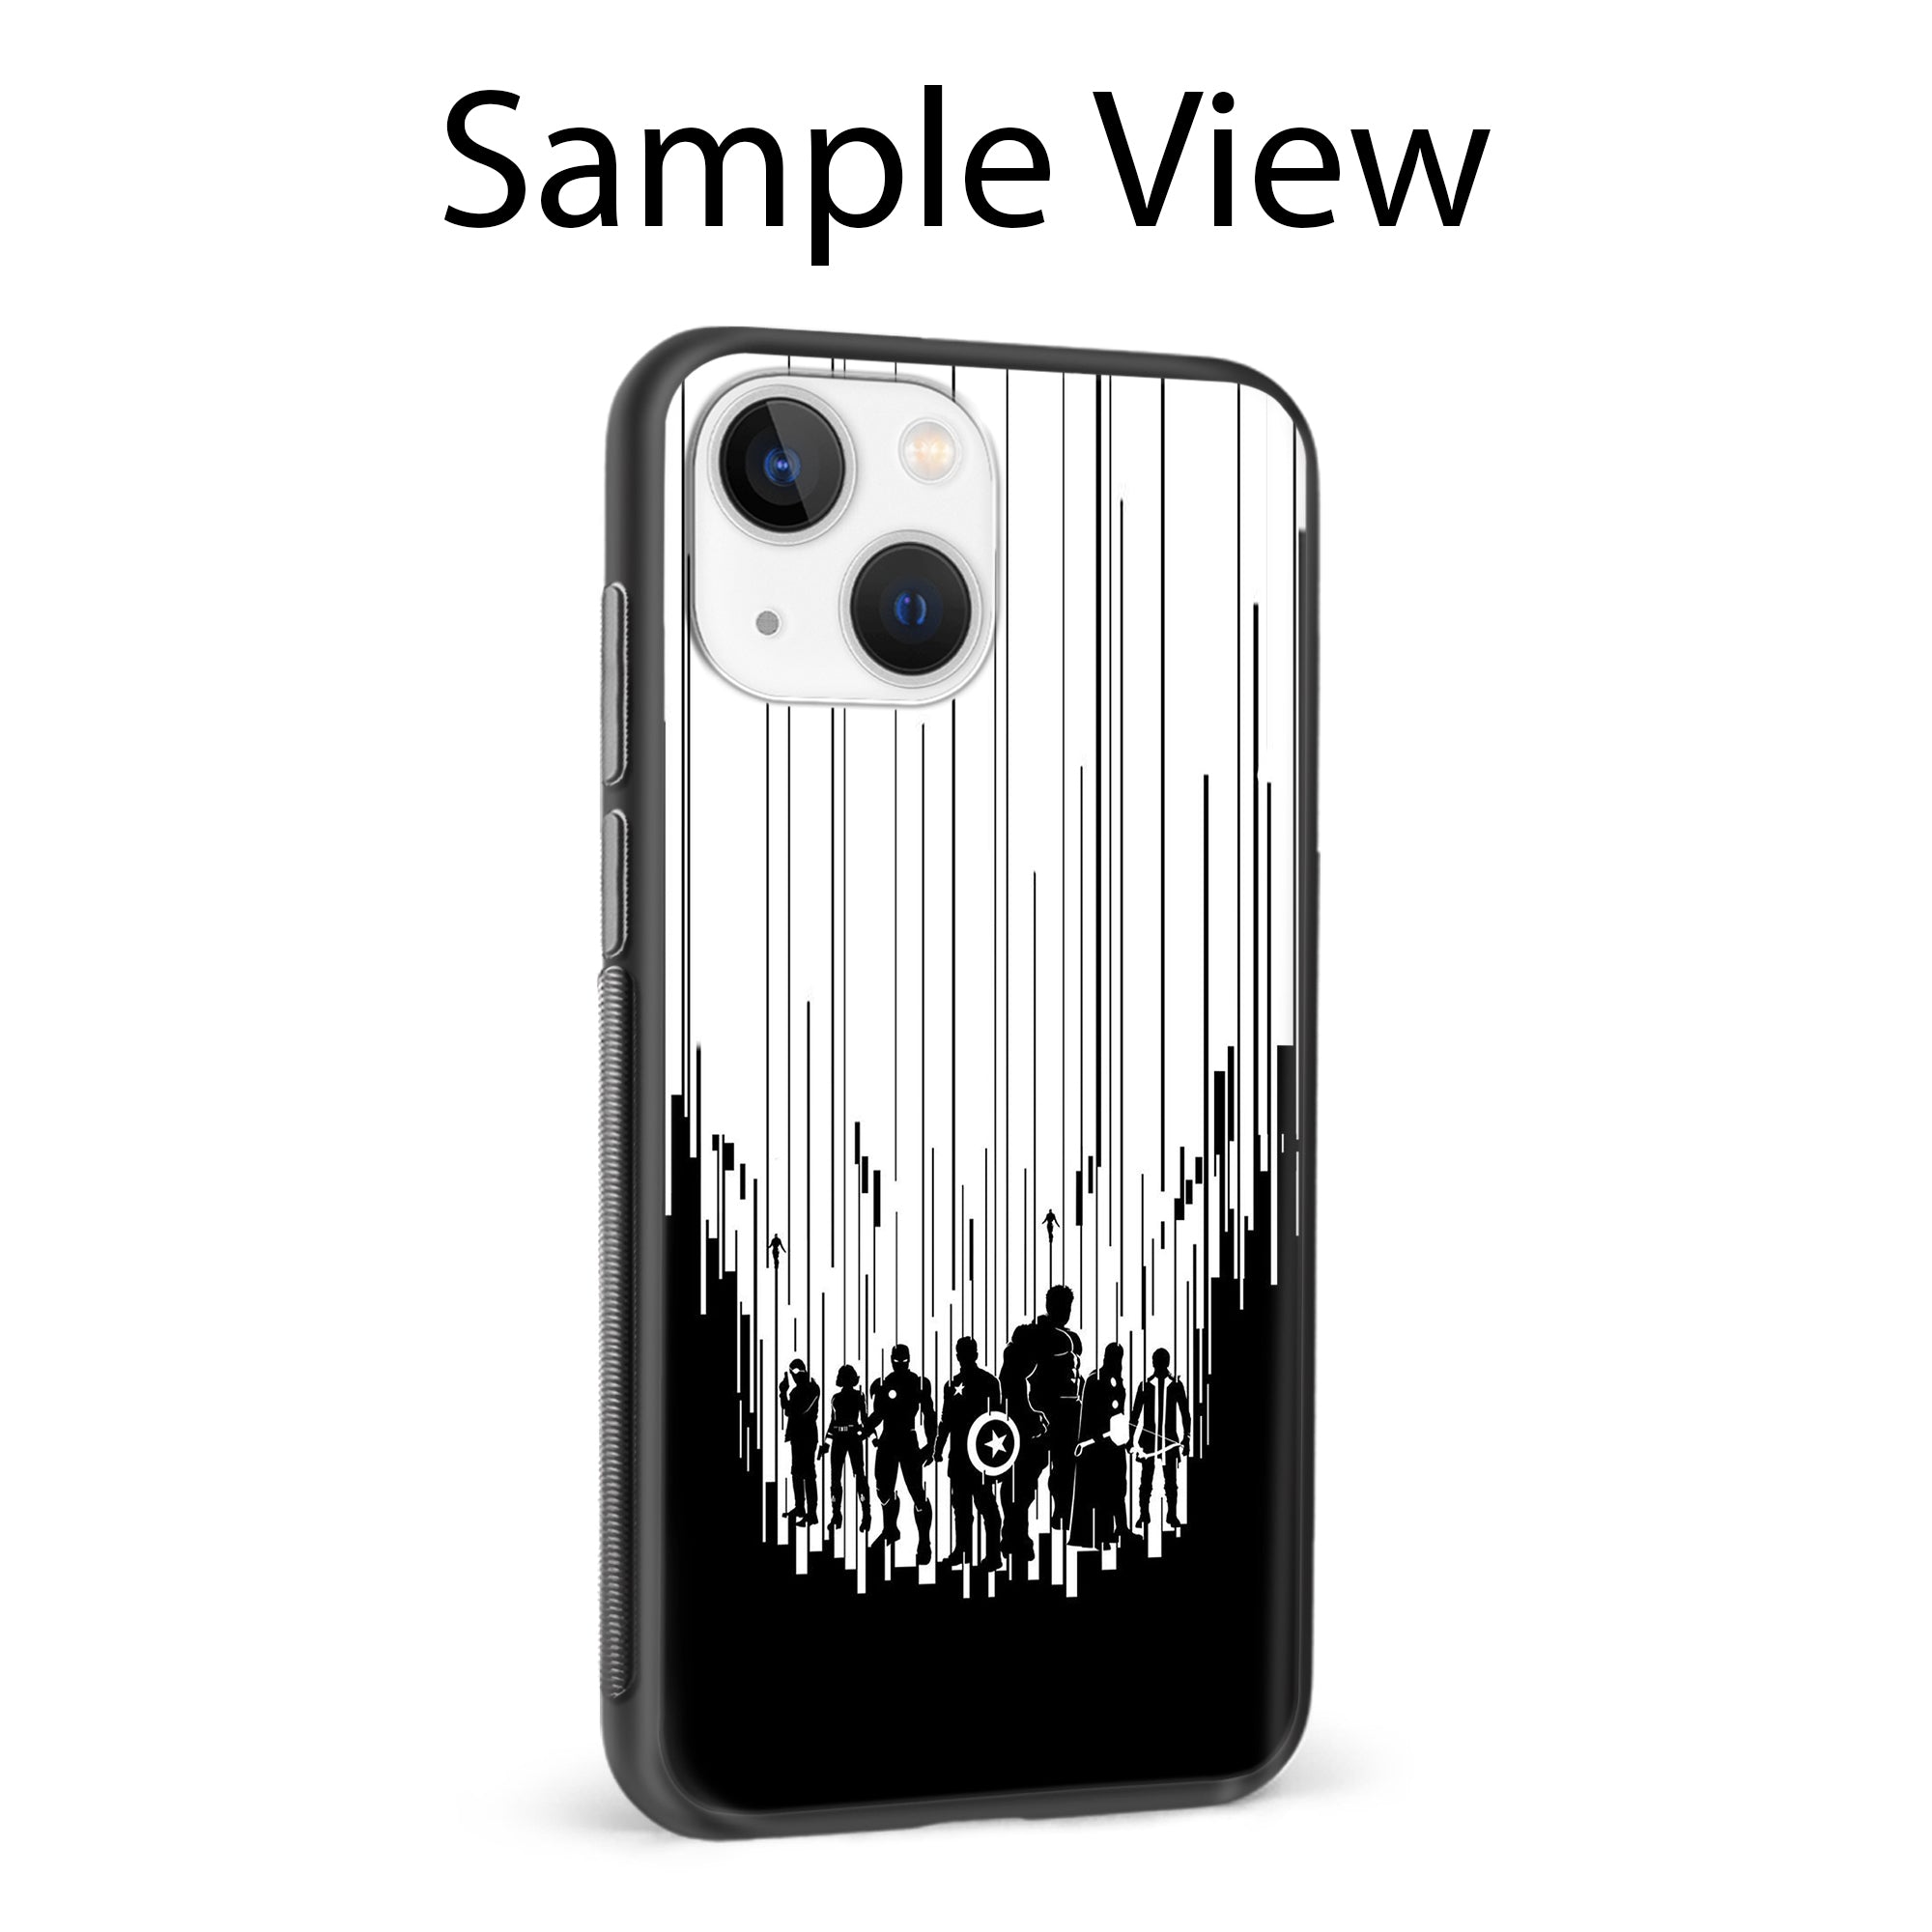 Buy Black And White Avanegers Glass/Metal Back Mobile Phone Case/Cover For Apple iPhone 12 pro Online